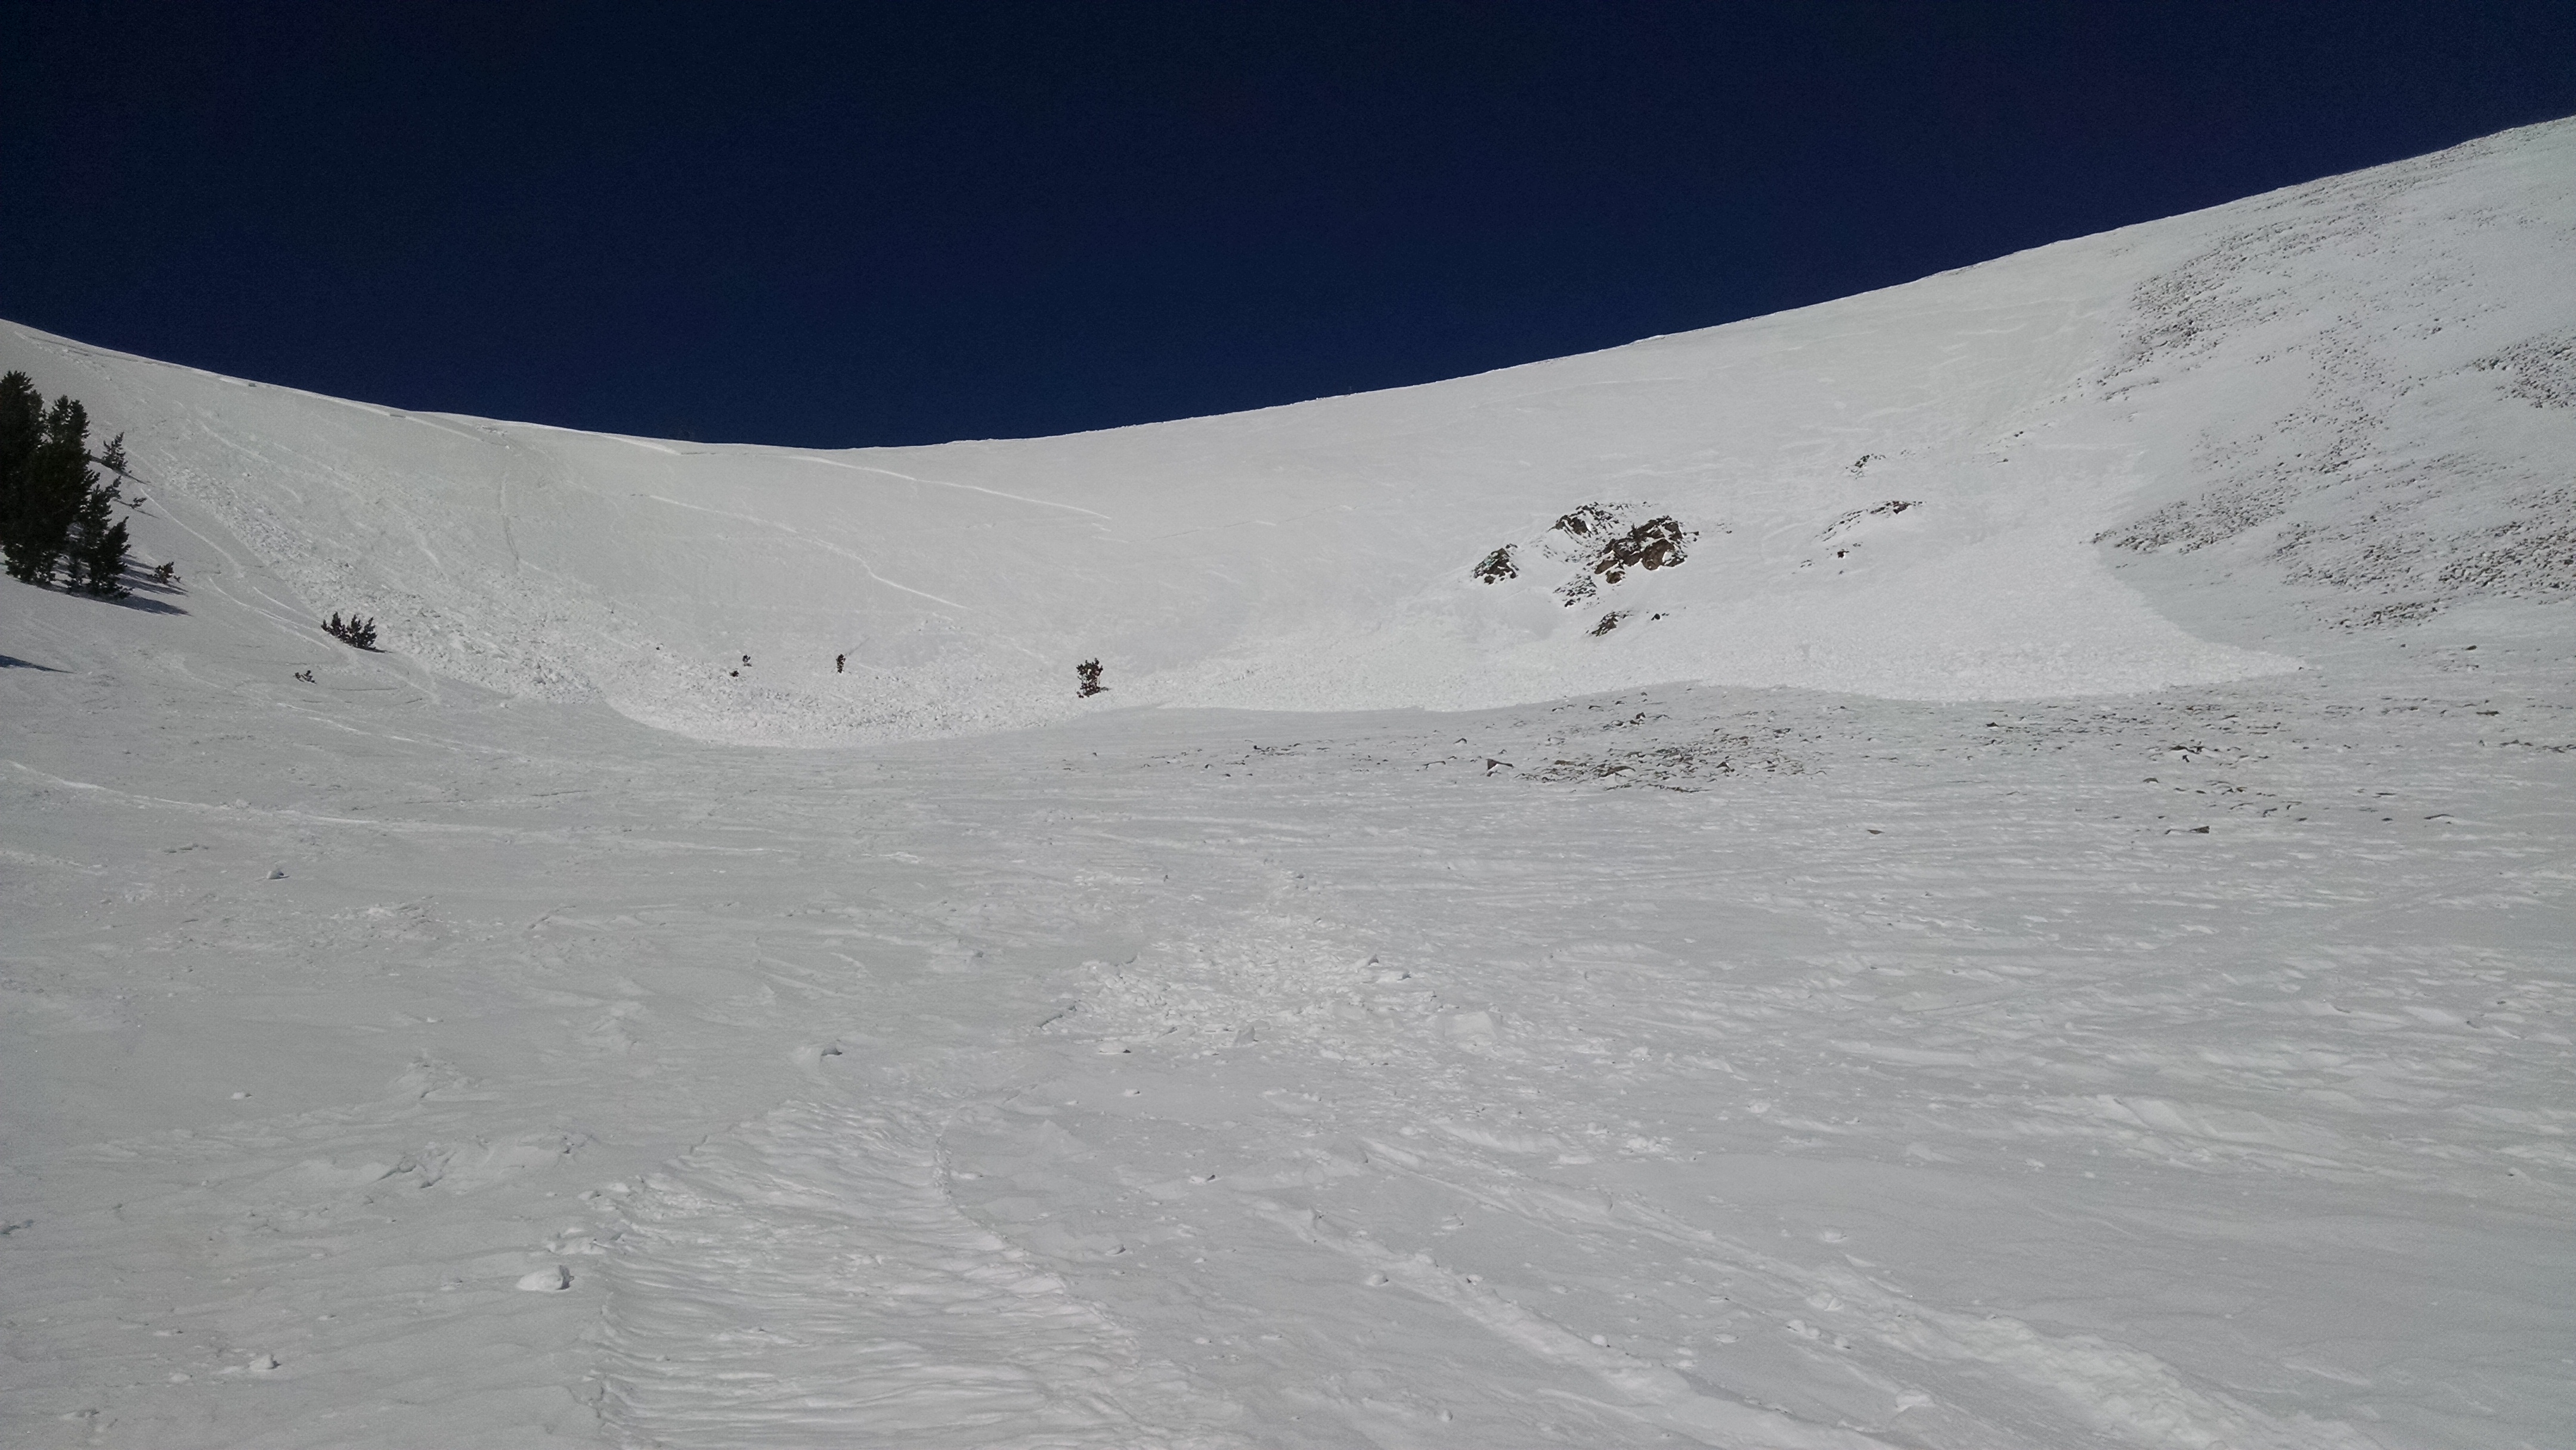 Wyoming Bowl Avalanche near Big Sky Gallatin National Forest